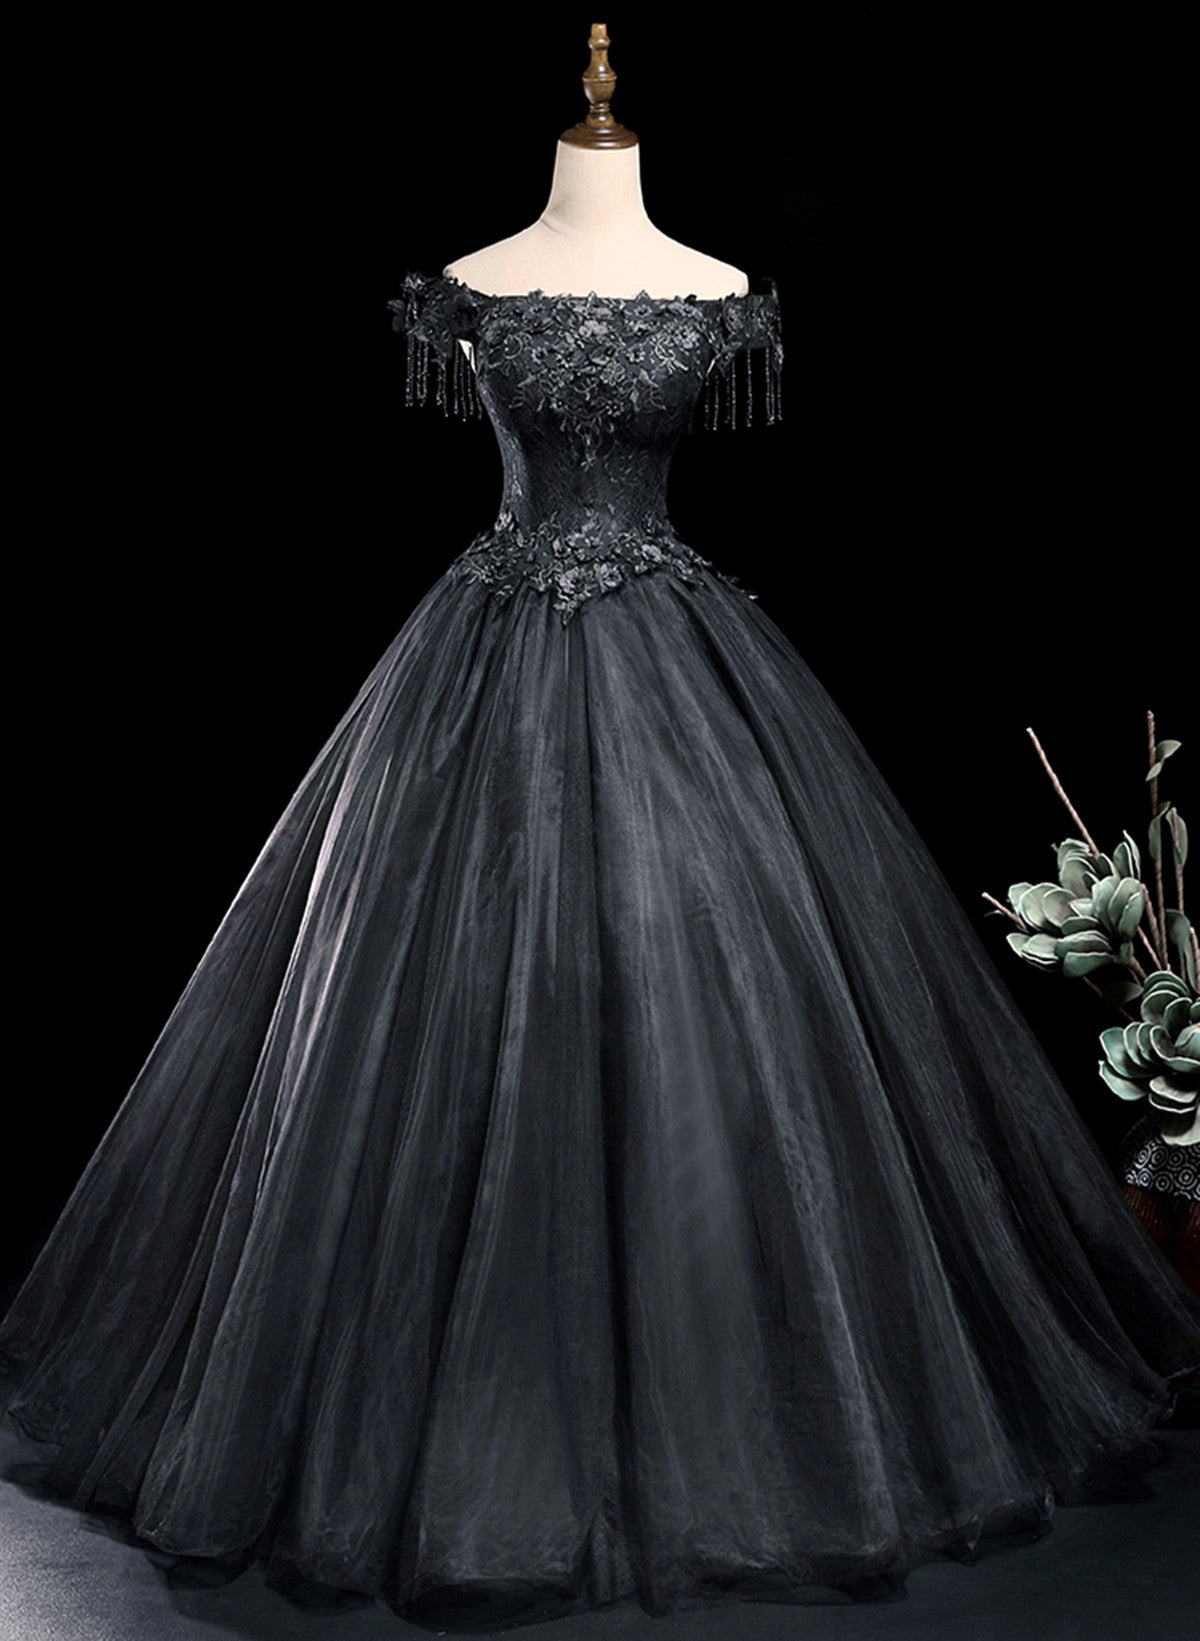 Black Tulle Off Shoulder with Lace Applique Party Dress Outfits For Girls, Black Tulle Long Sweet 16 Dress